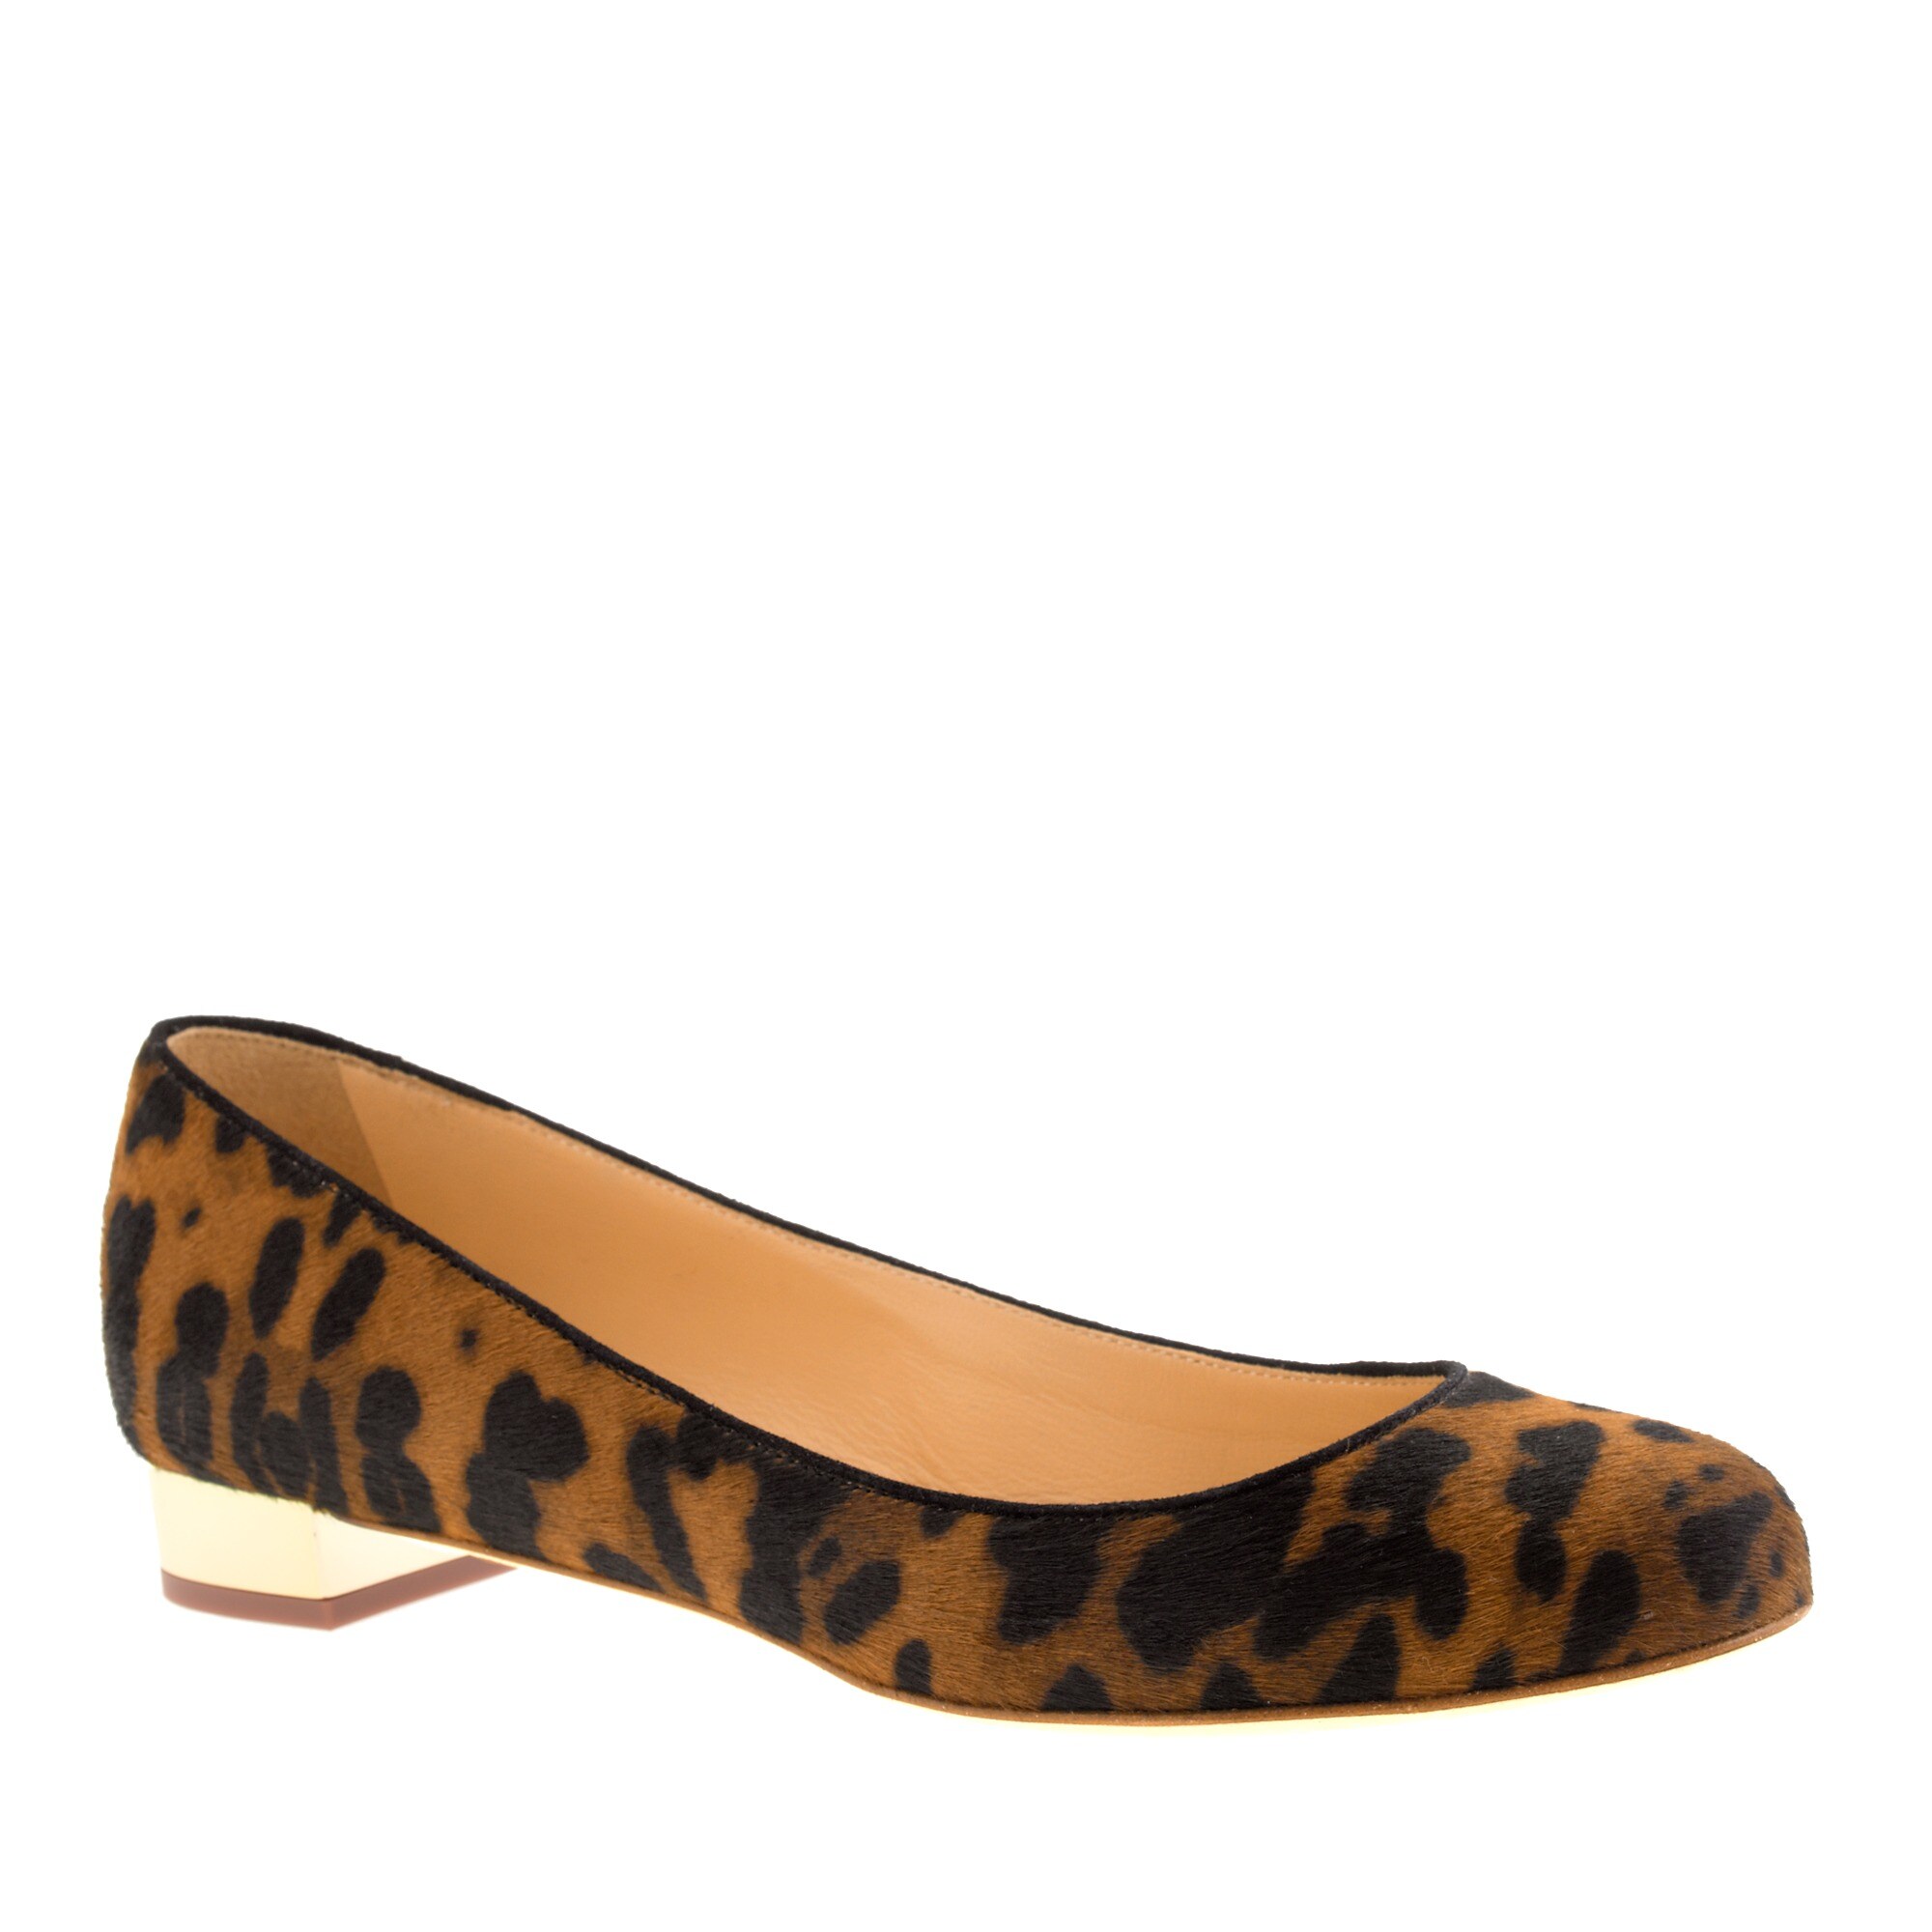 J.Crew: Collection Janey calf hair flats